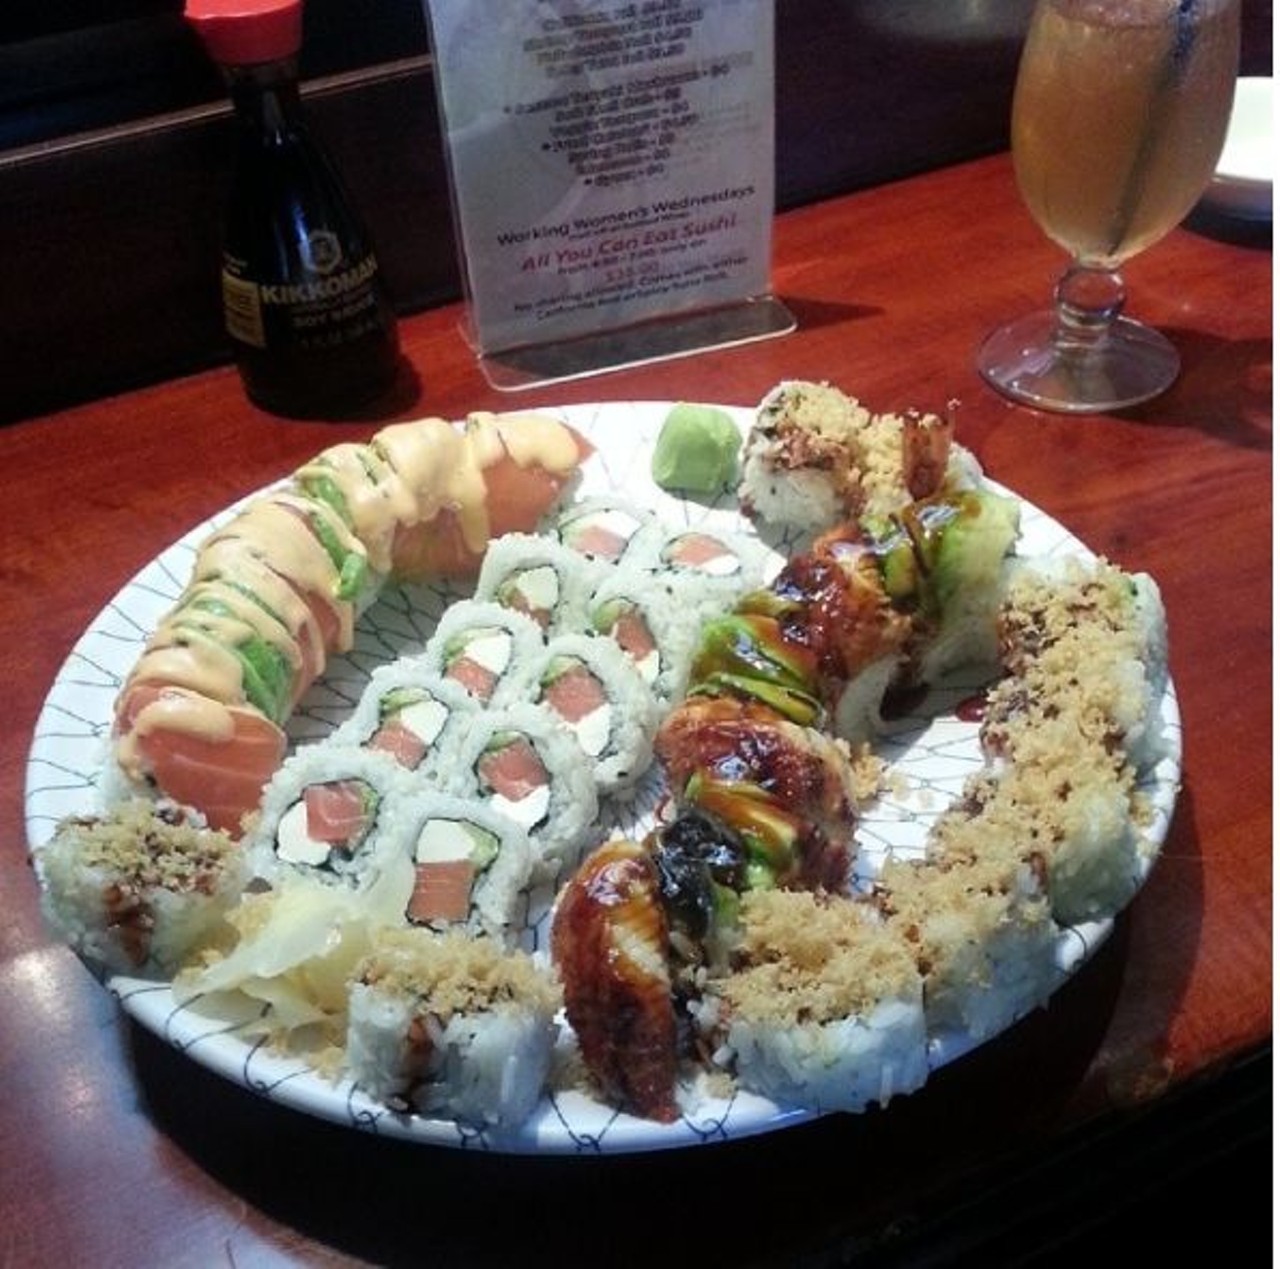 Sumo Japanese Steakhouse
Sure you could have dinner and a show, but you won&#146;t miss out on the action if you order from the sushi menu that includes all the classics. 
https://www.instagram.com/p/pkMly8hjC4/?taken-at=225049488